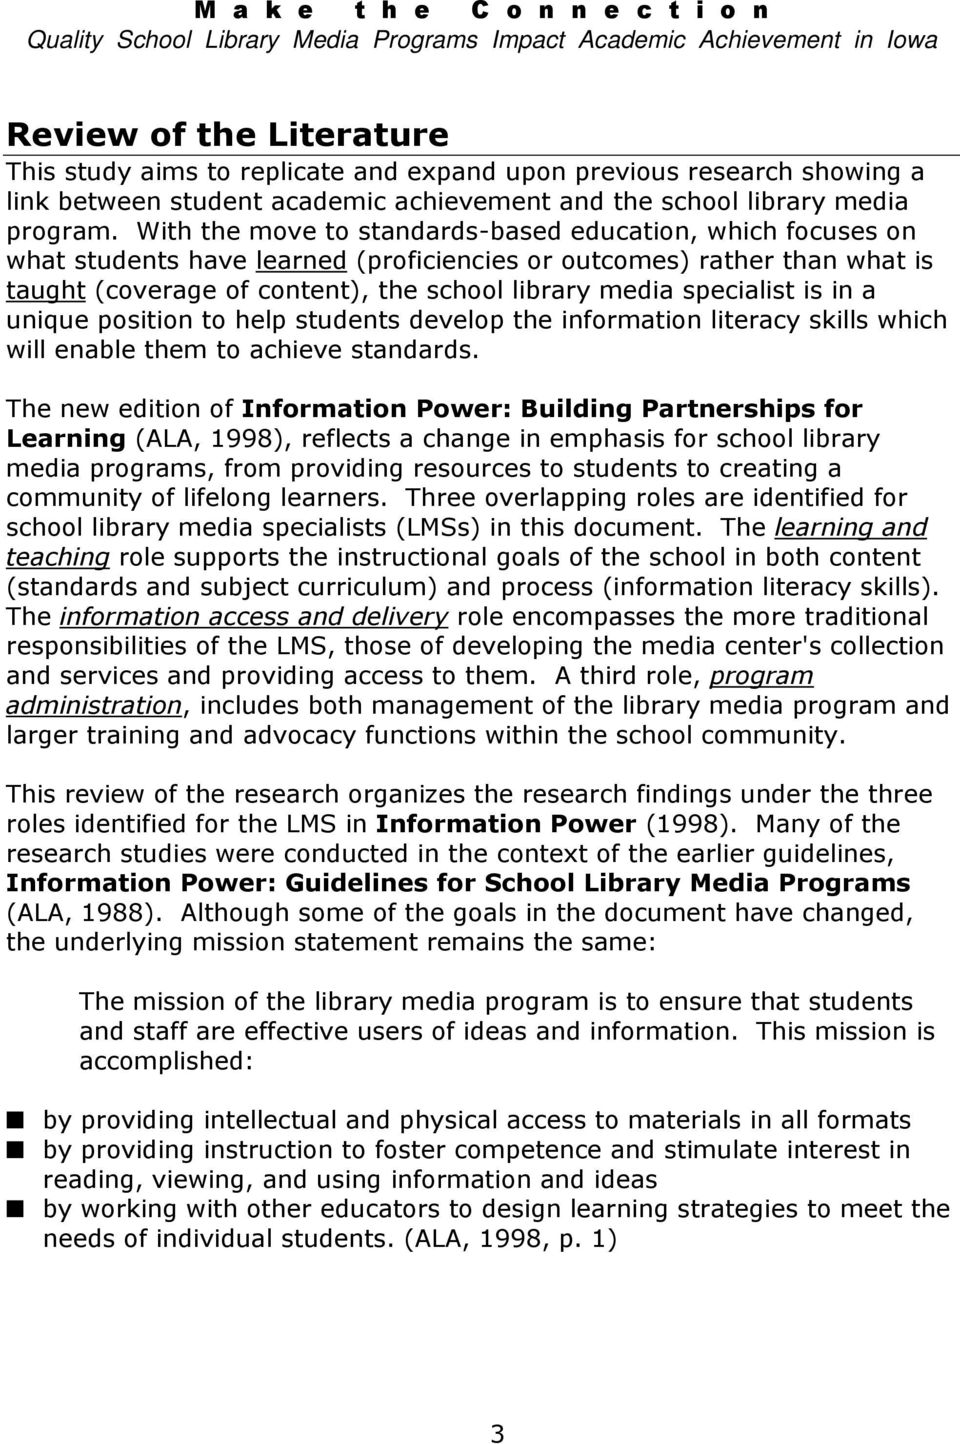 specialist is in a unique position to help students develop the information literacy skills which will enable them to achieve standards.